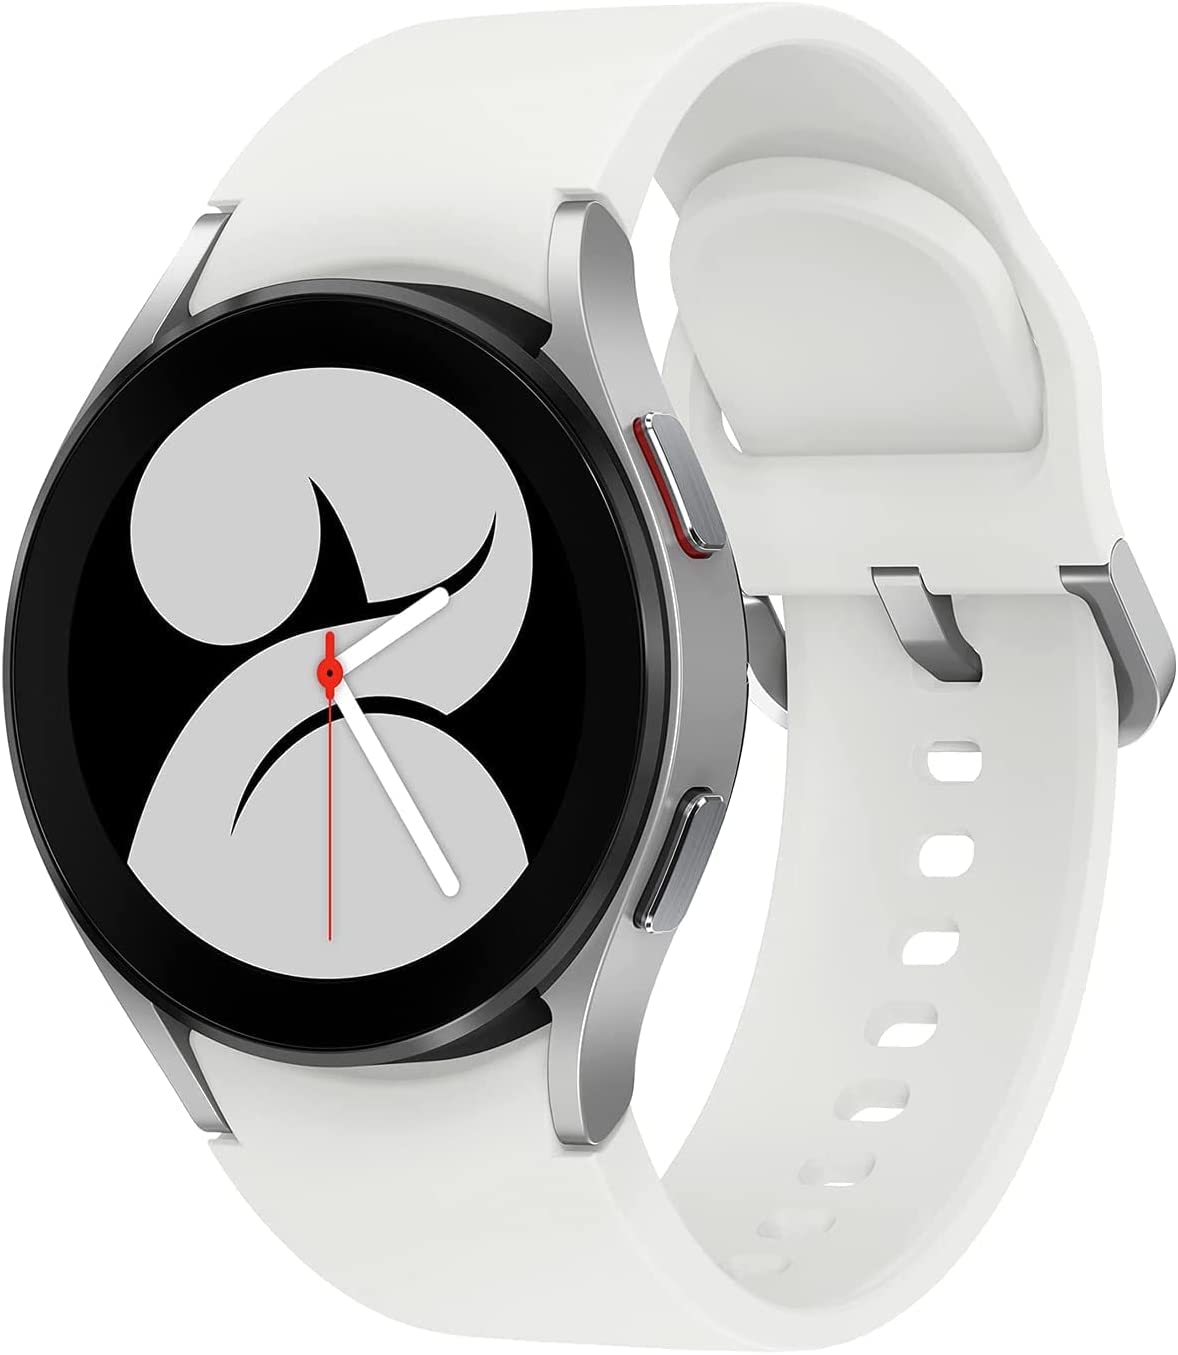 SAMSUNG Galaxy Watch 4 40mm Smartwatch with ECG Monitor Tracker – Just $209.99 at Amazon